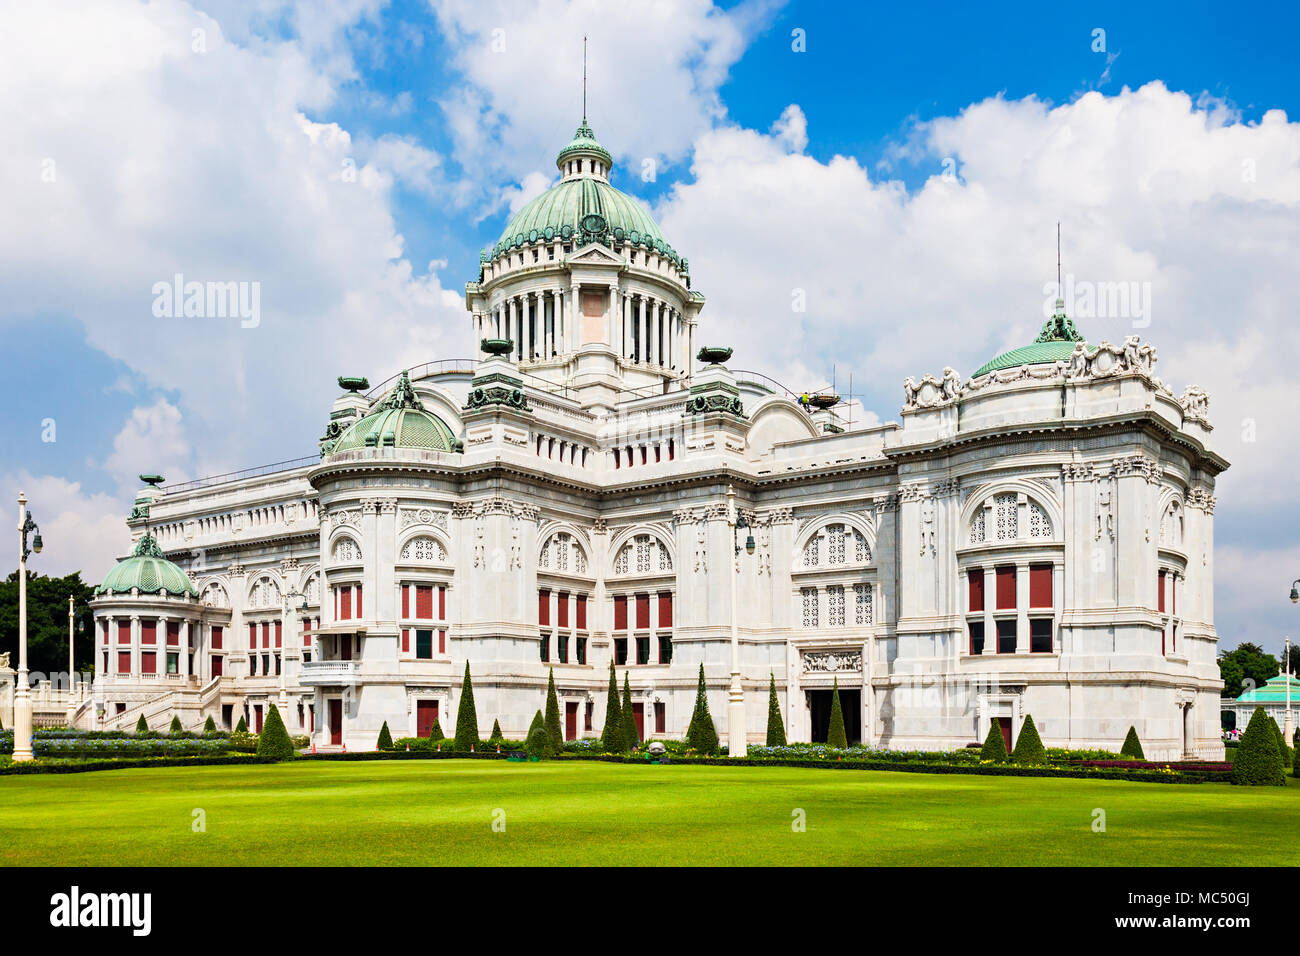 The Ananta Samakhom Throne Hall is a former reception hall within Dusit Palace in Bangkok, Thailand Stock Photo